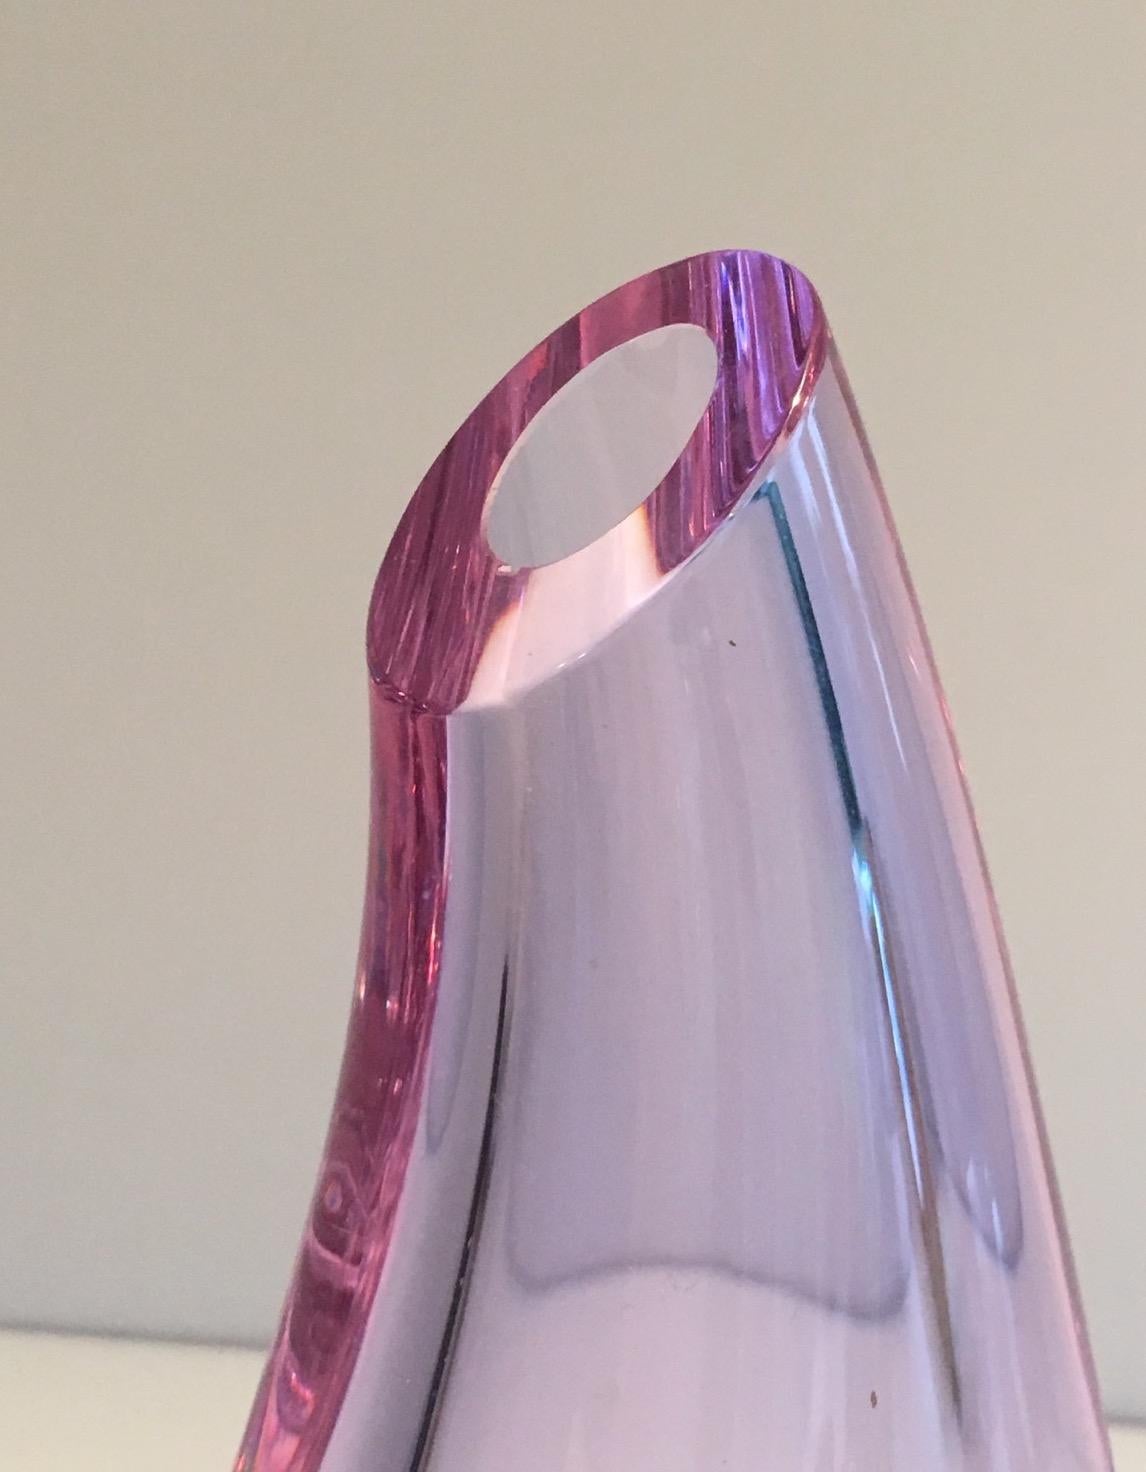 Glass Purplish-Colored Pear-Shaped Vase. French Work, Circa 1970 For Sale 4